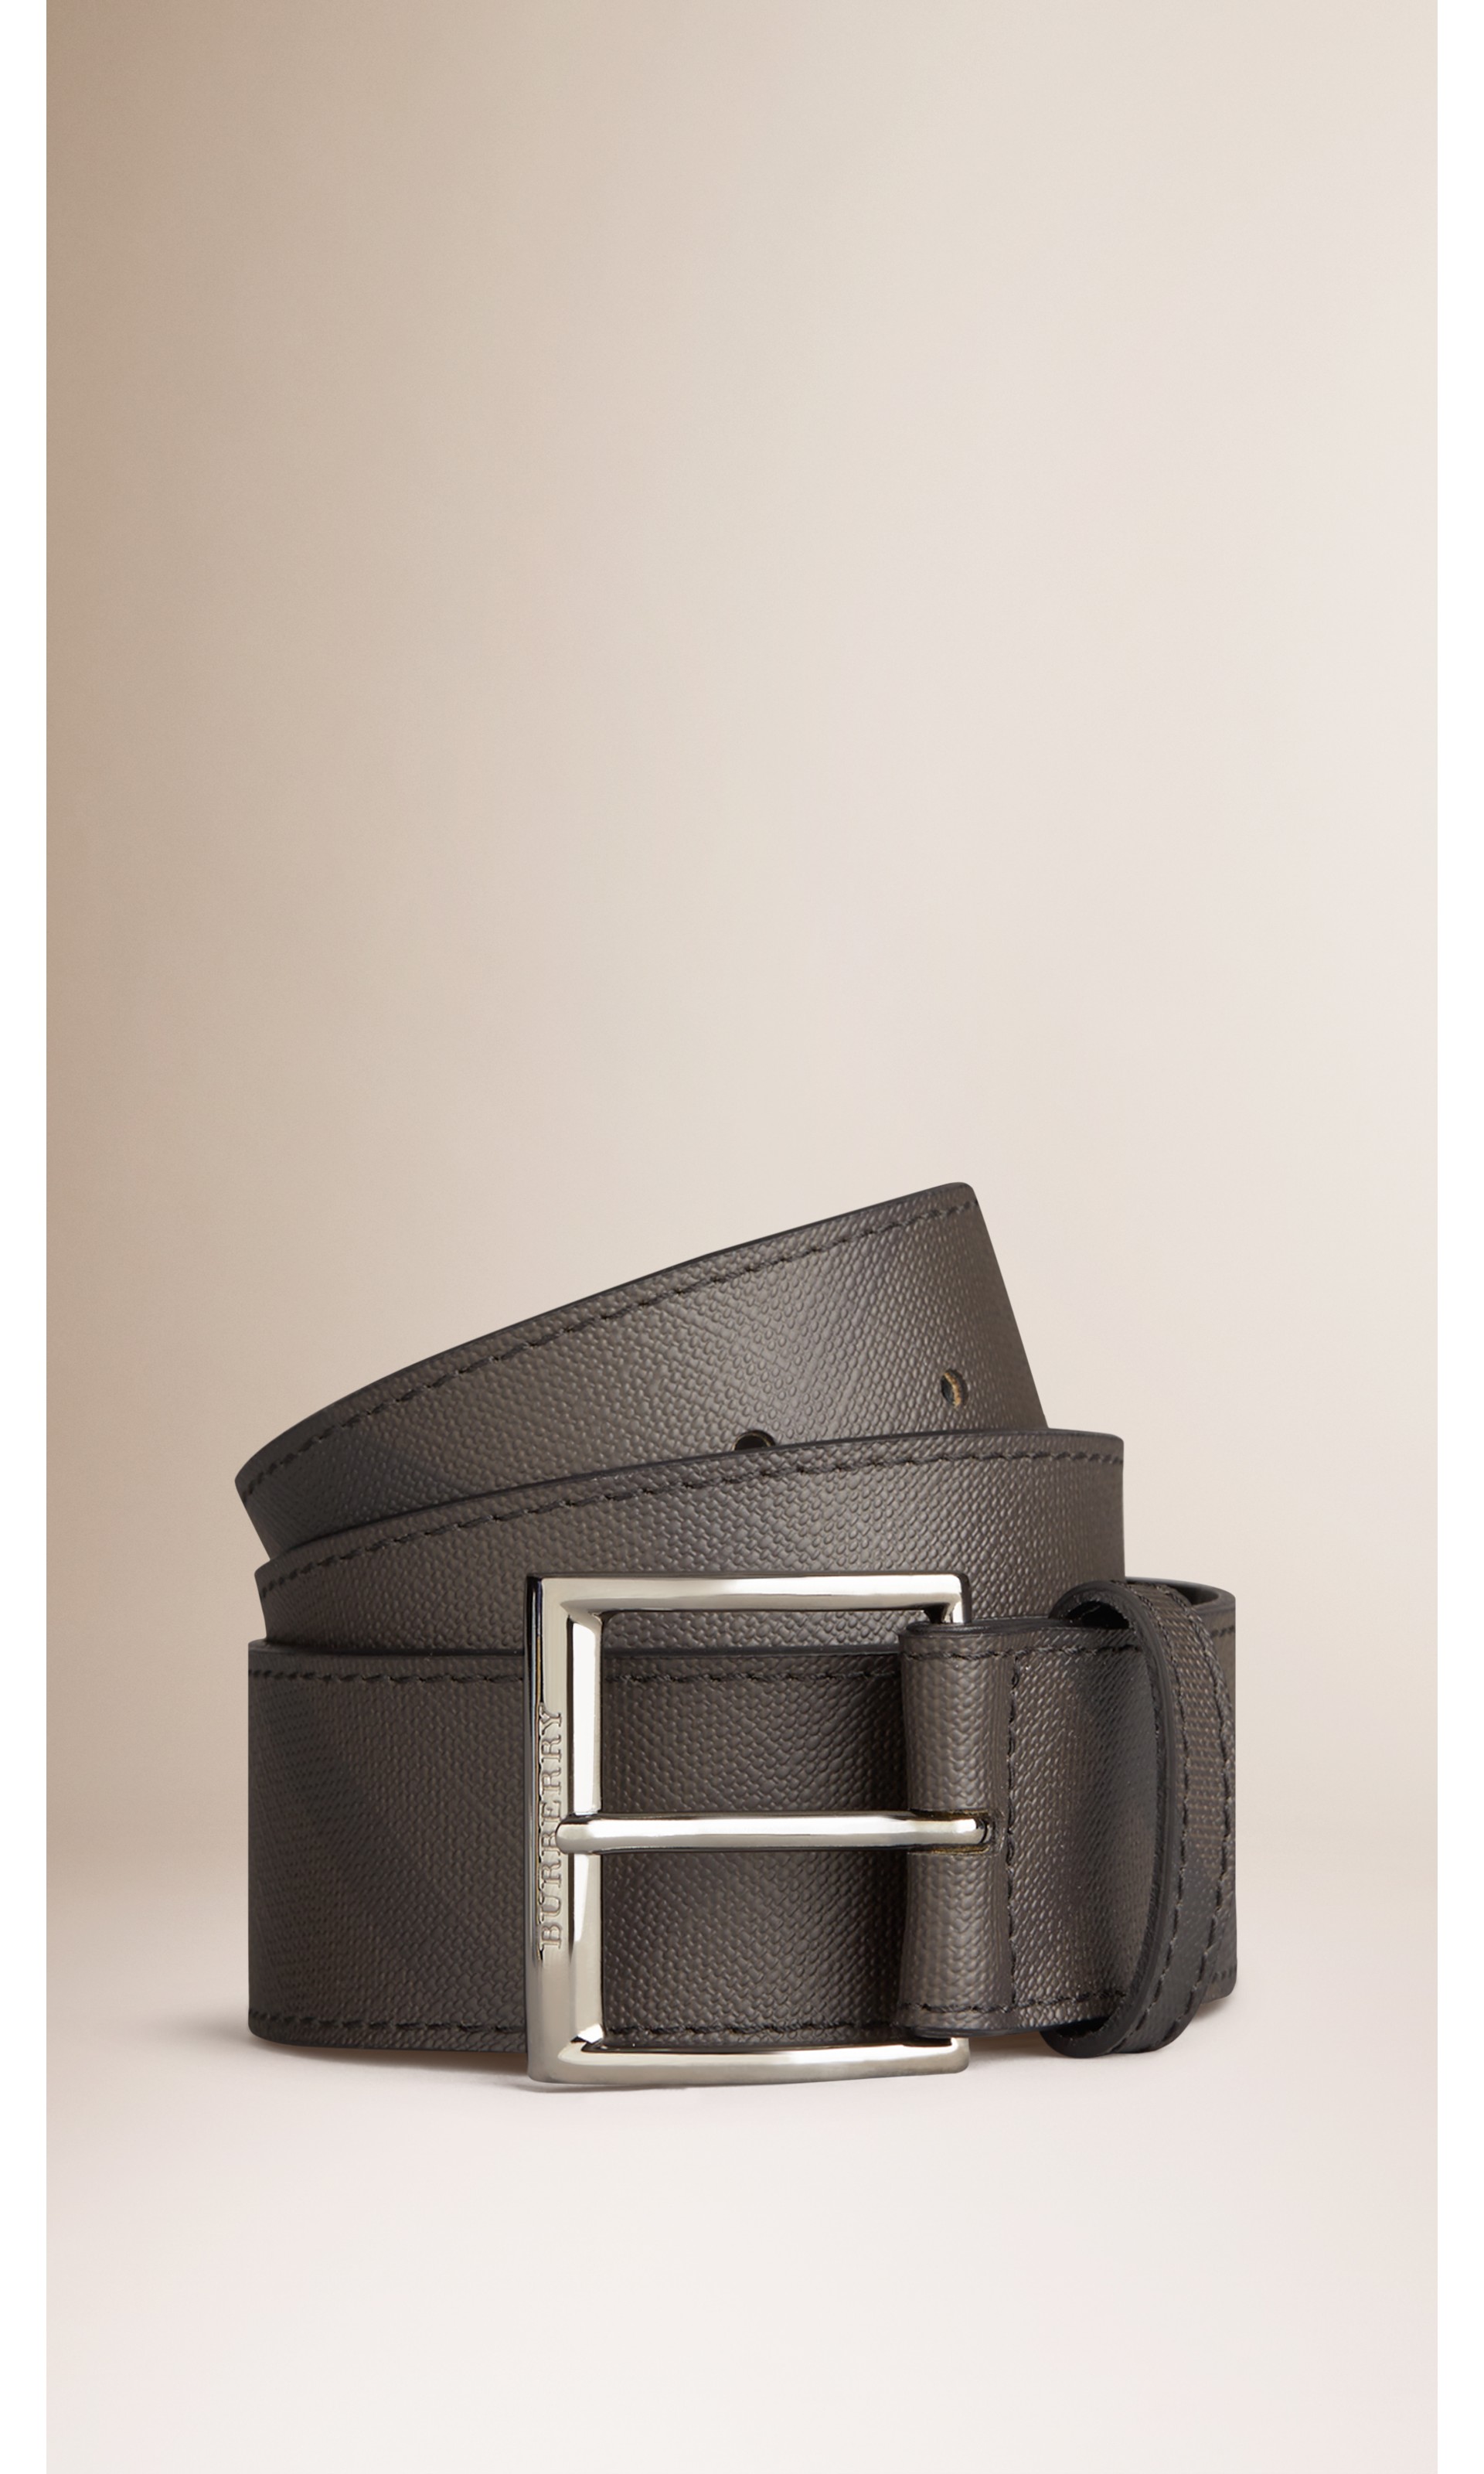 Smoked Check Belt in Black - Men | Burberry United States